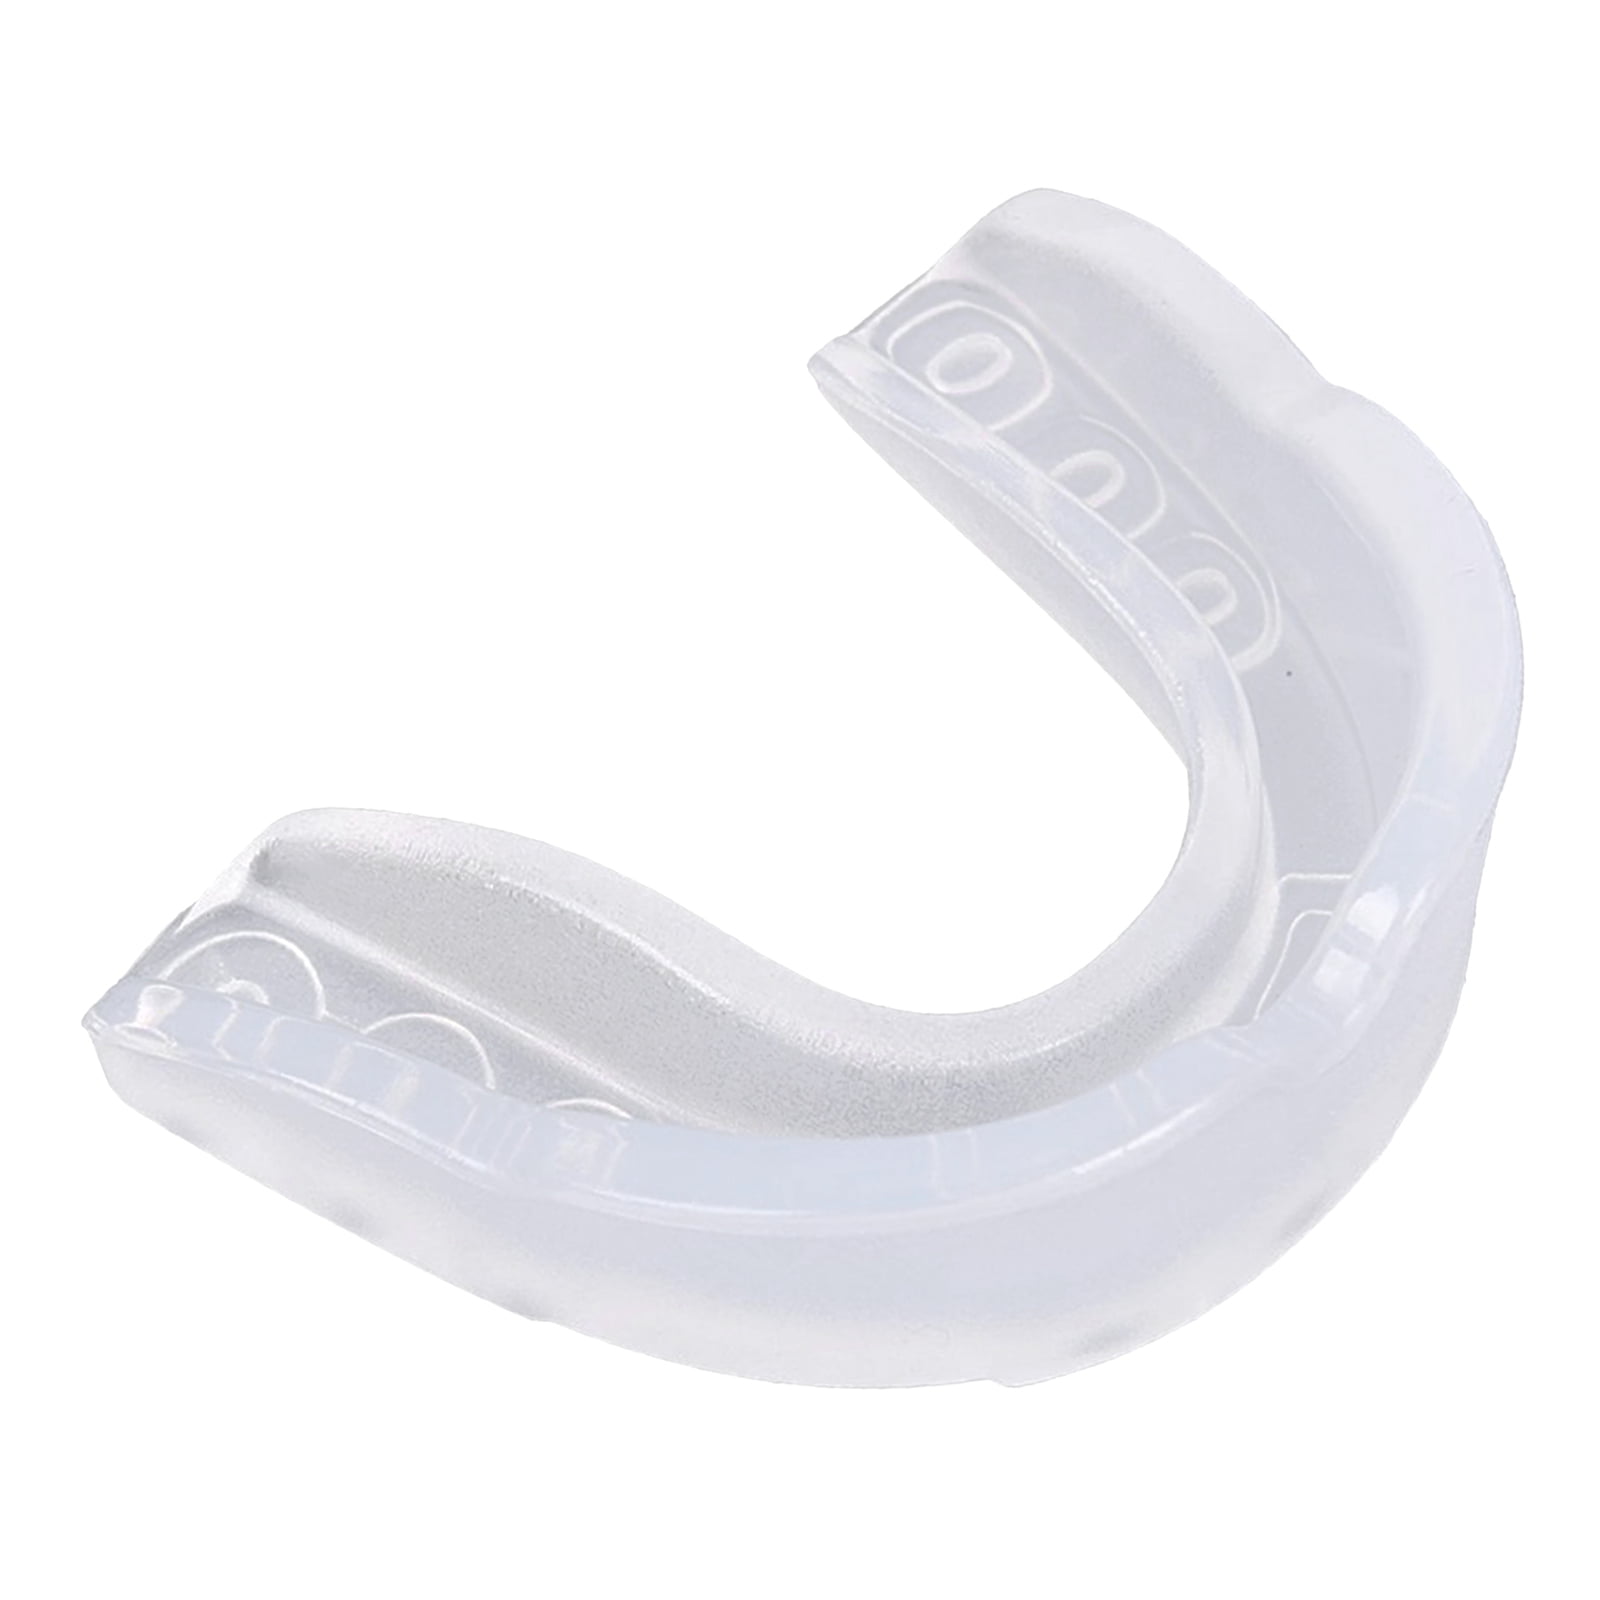 1 Pcs Mouthguard Boil Bite Teeth Grinding Gum shield Boxing MouthGuard MMA Rugby 